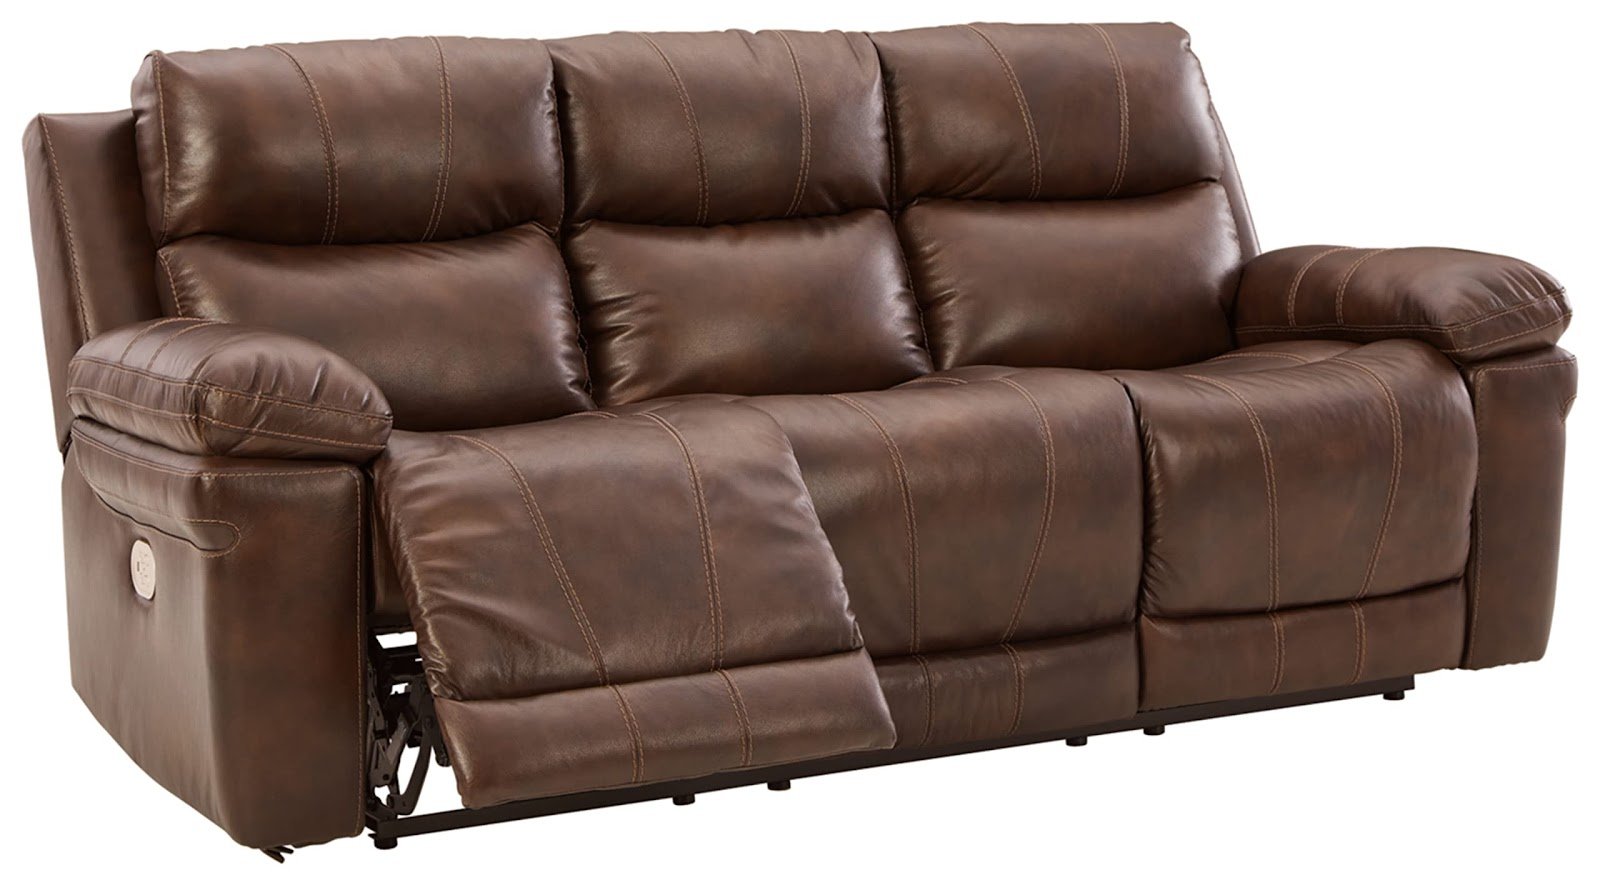 Signature Design by Ashley Edmar Leather Power Reclining Sofa with Adjustable Headrest, Brown Brown Sofa